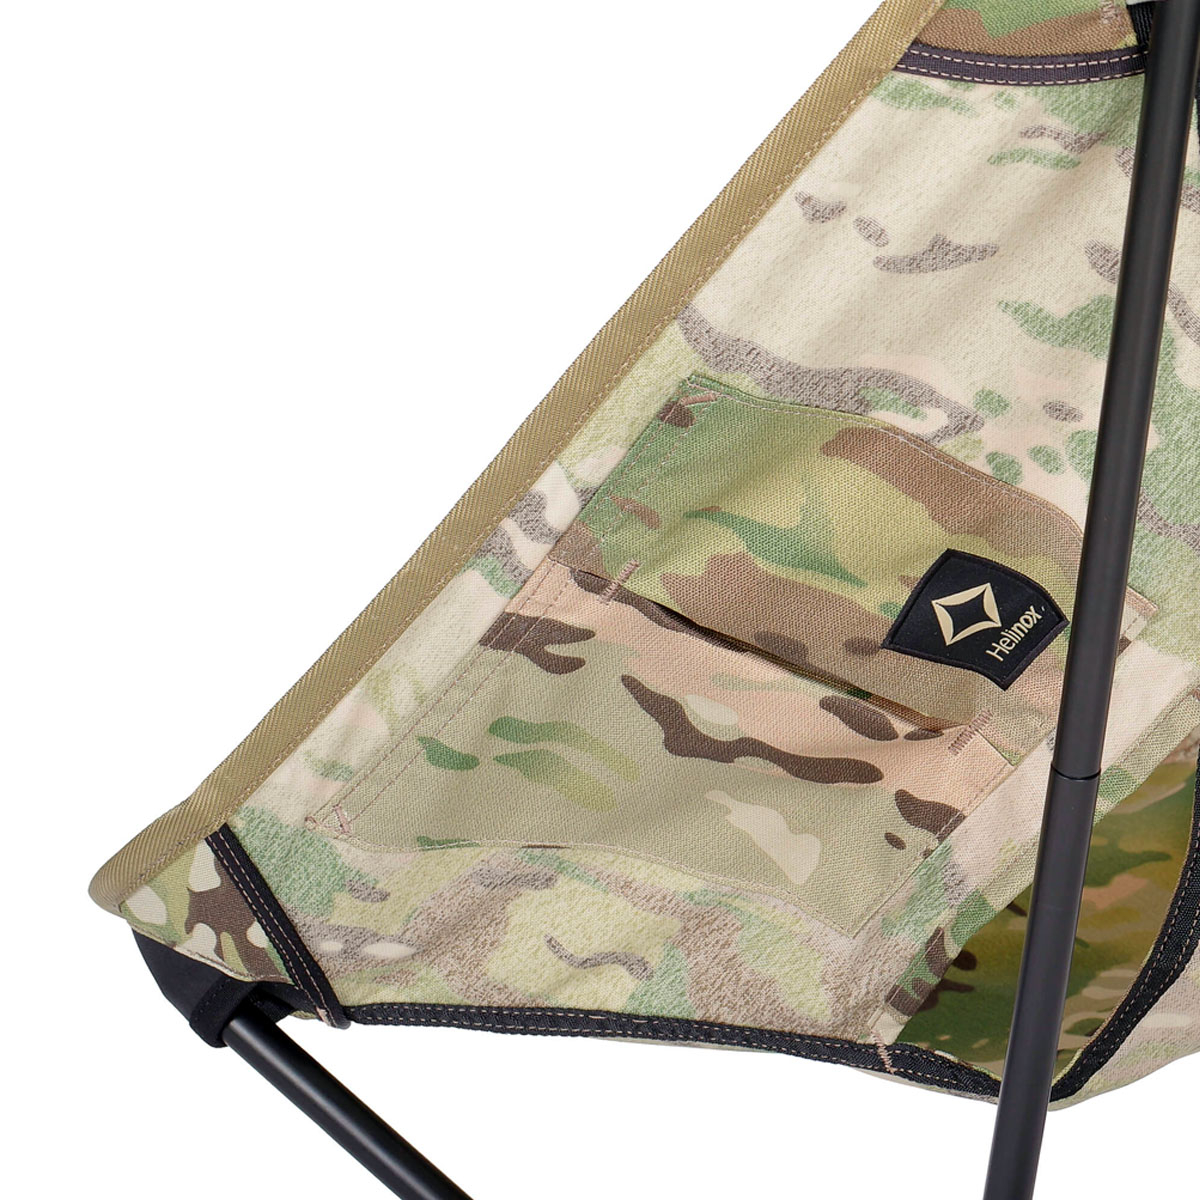 Helinox Tactical Chair One MultiCam, with added pockets to secure valuables and gear